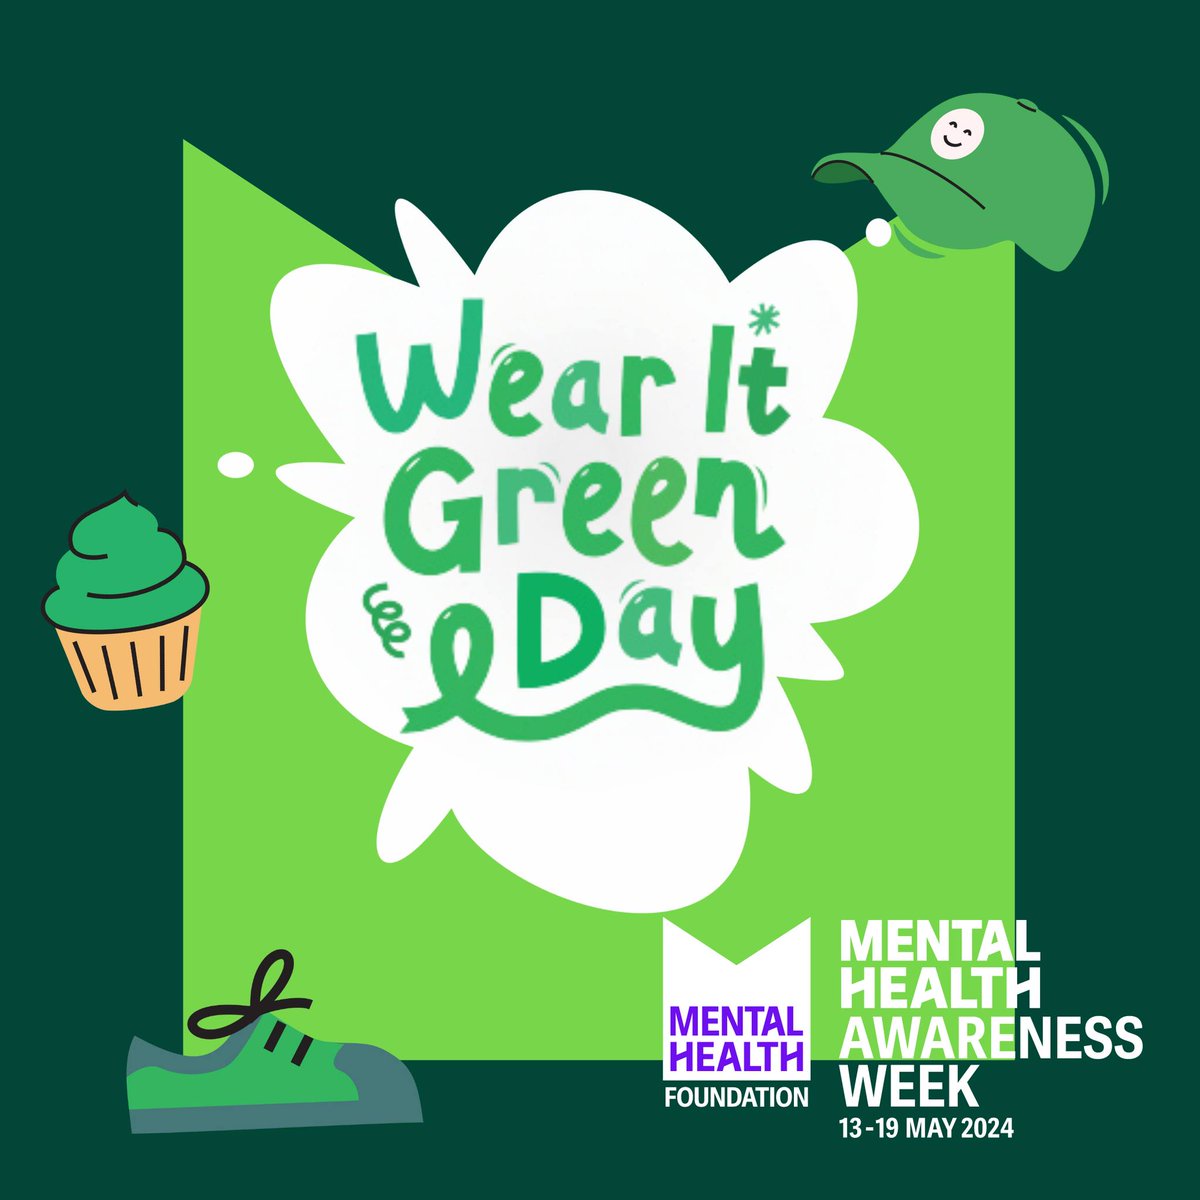 Today is Wear it Green day in aid of Mental Health Awareness Week. If you are wearing Green or taking part in any of the activities send in your pictures 👇 . Find out more about Mental Health Awareness Week here: mentalhealth.org.uk